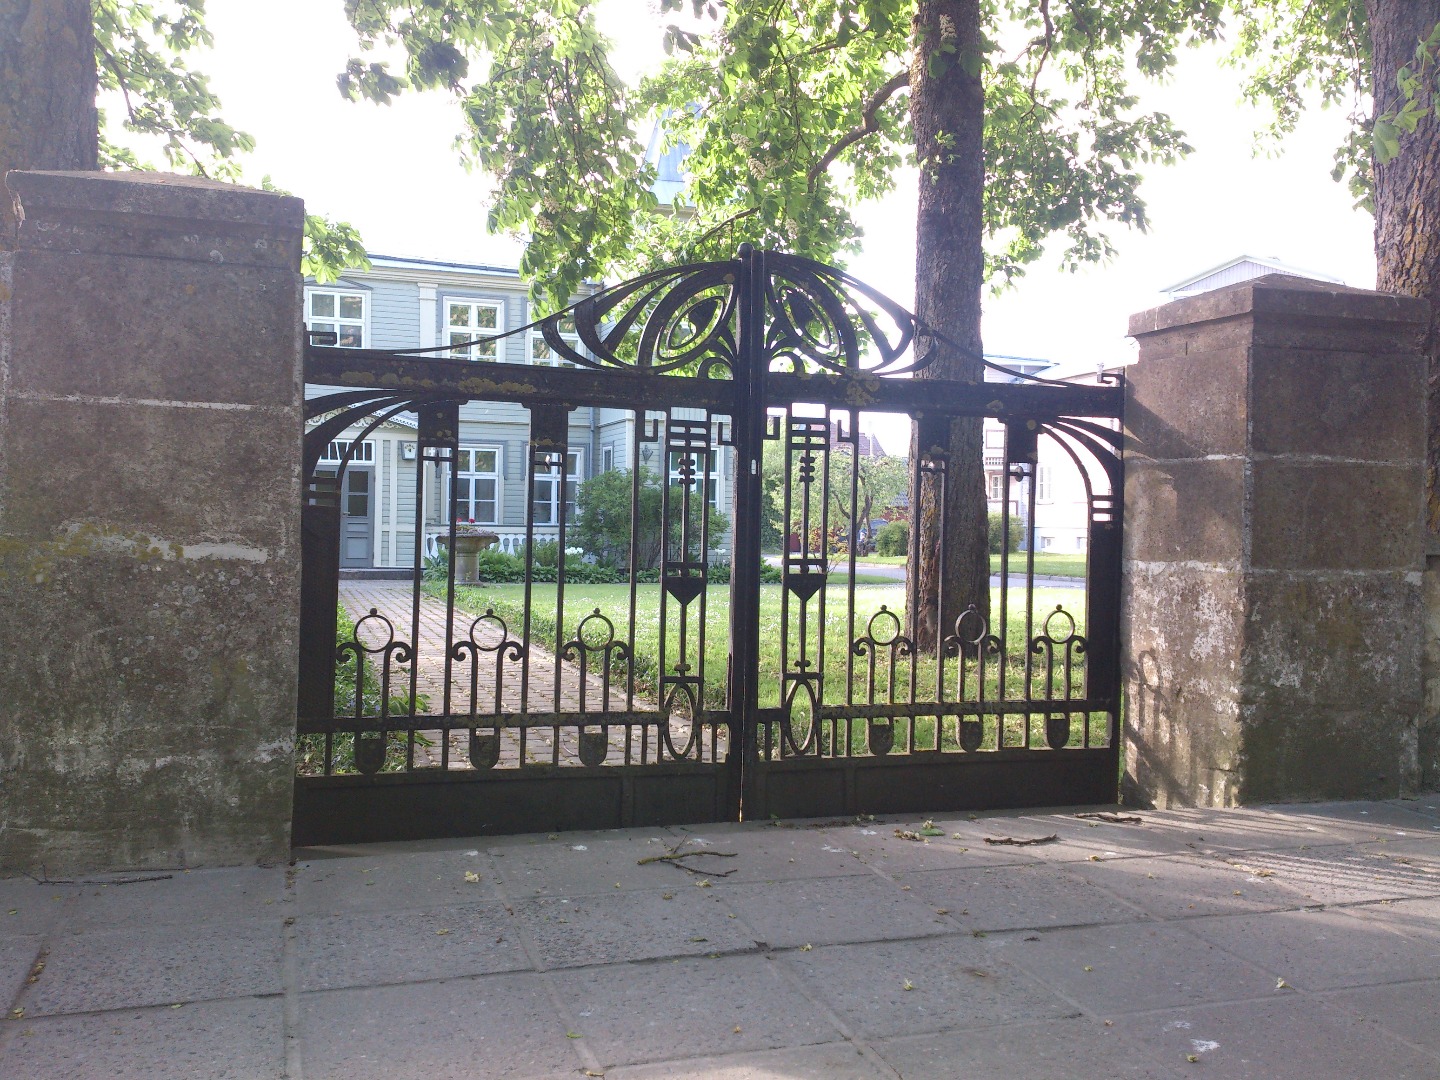 Former Waldmann's pansion: close view to the gate rephoto